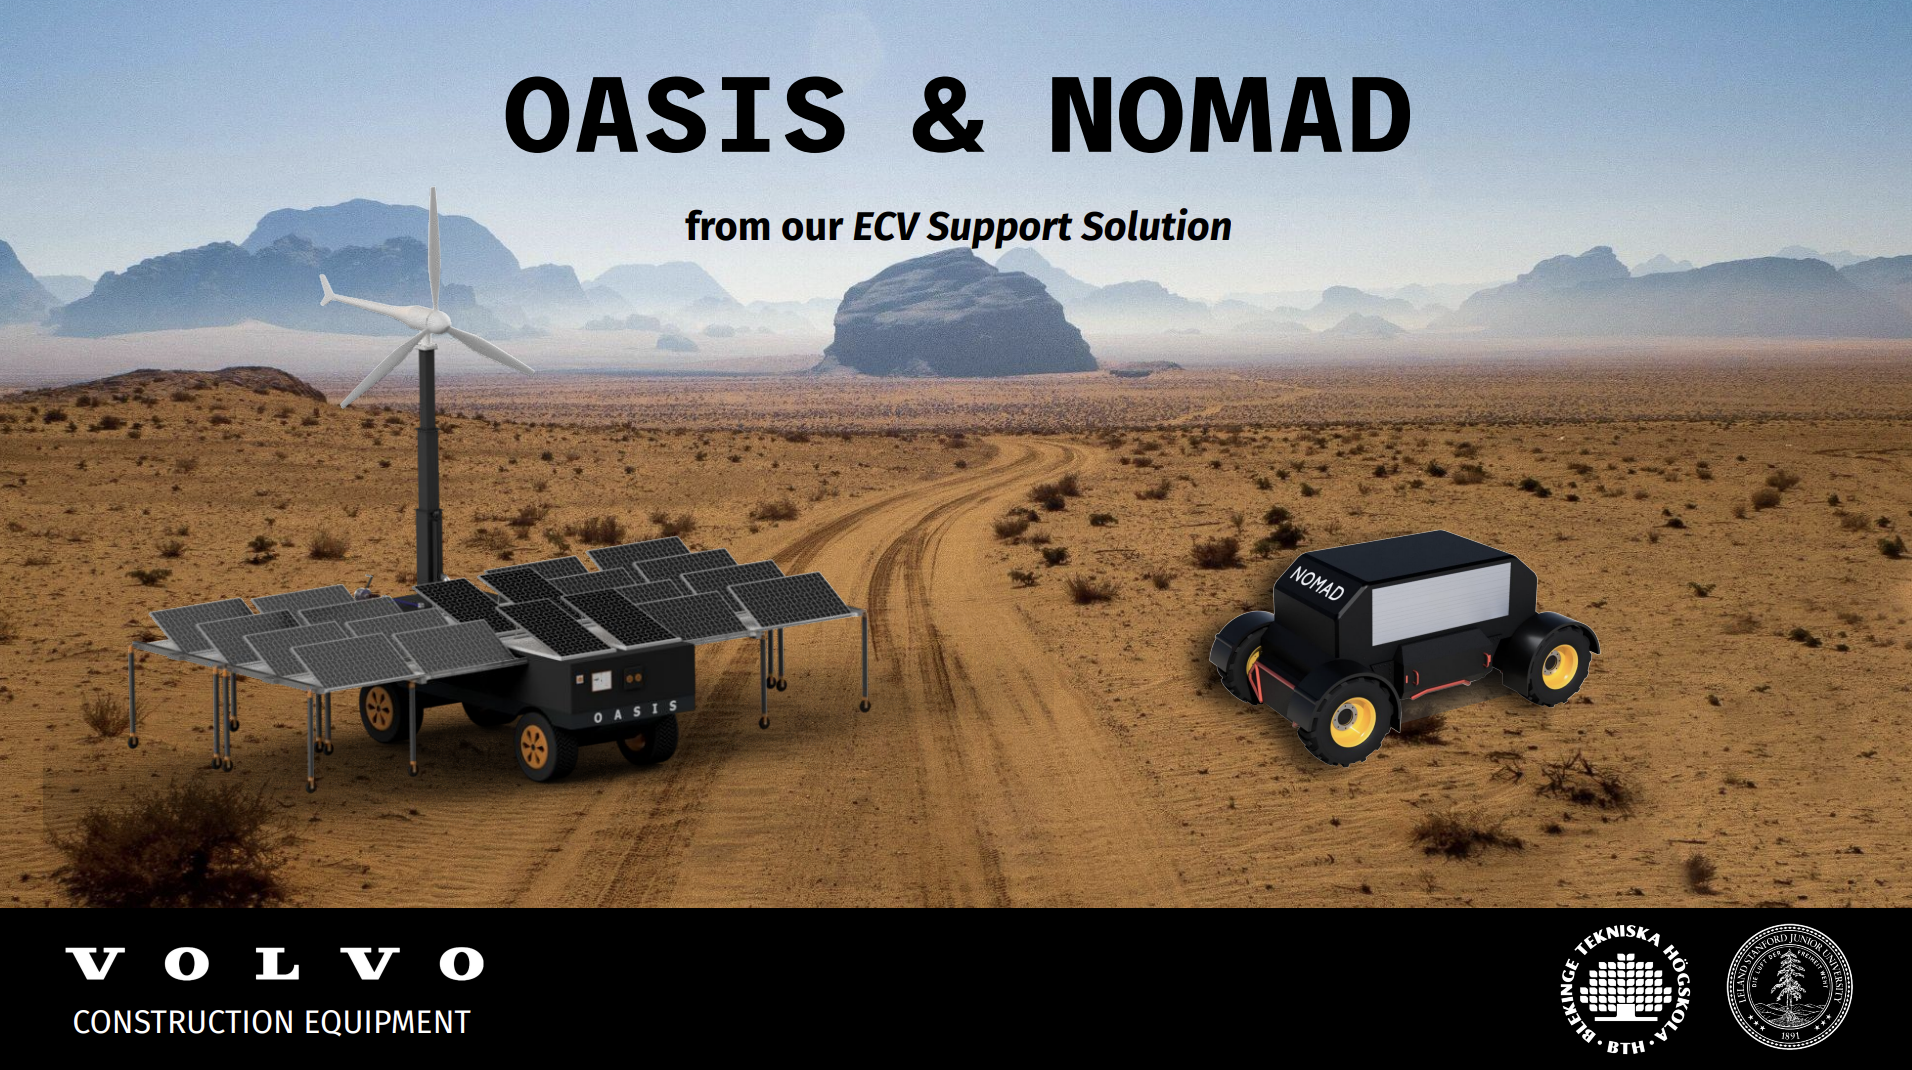 Oasis/Nomad renewable energy solution presented at Stanford EXPE